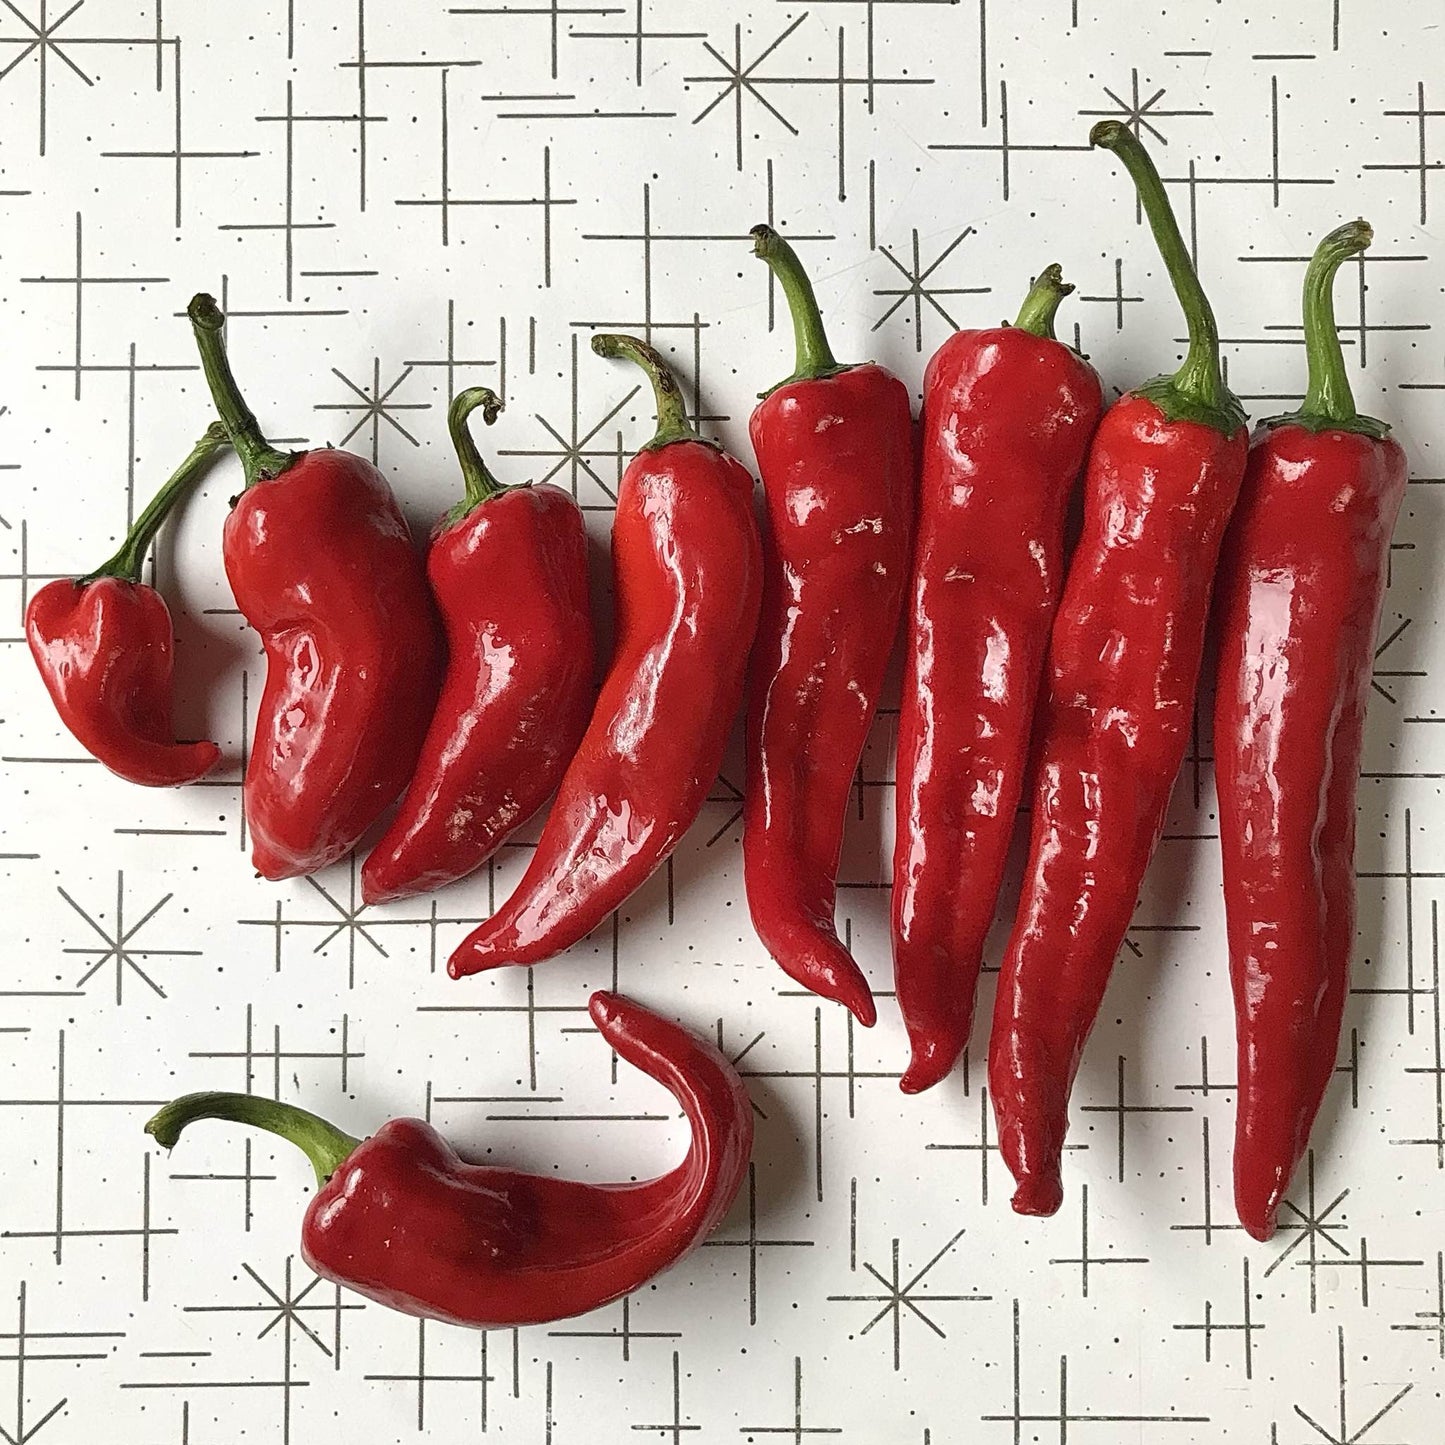 variously sized chimayo peppers